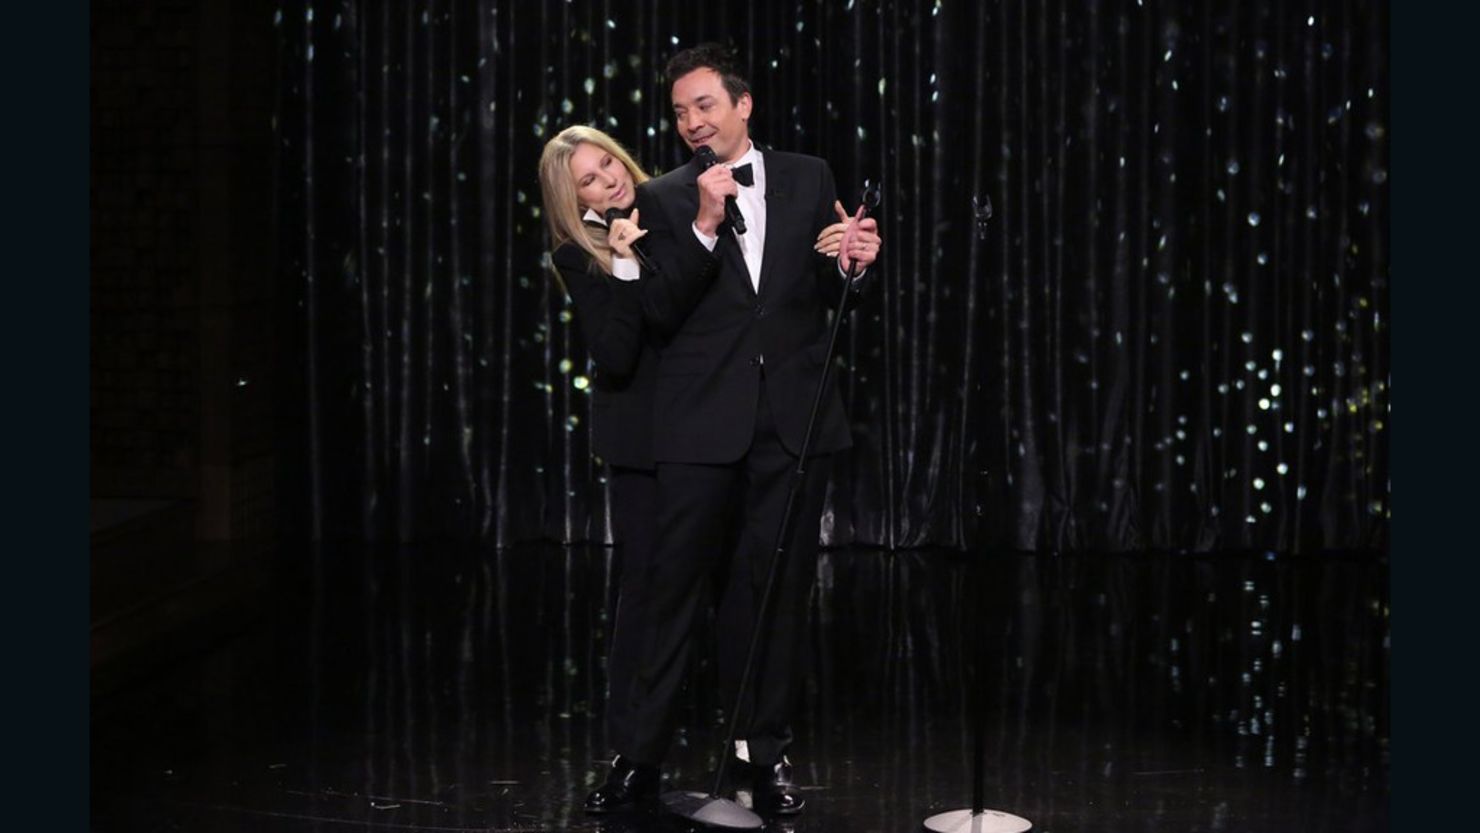 Barbra Streisand and host Jimmy Fallon sing a duet Monday on "The Tonight Show With Jimmy Fallon."